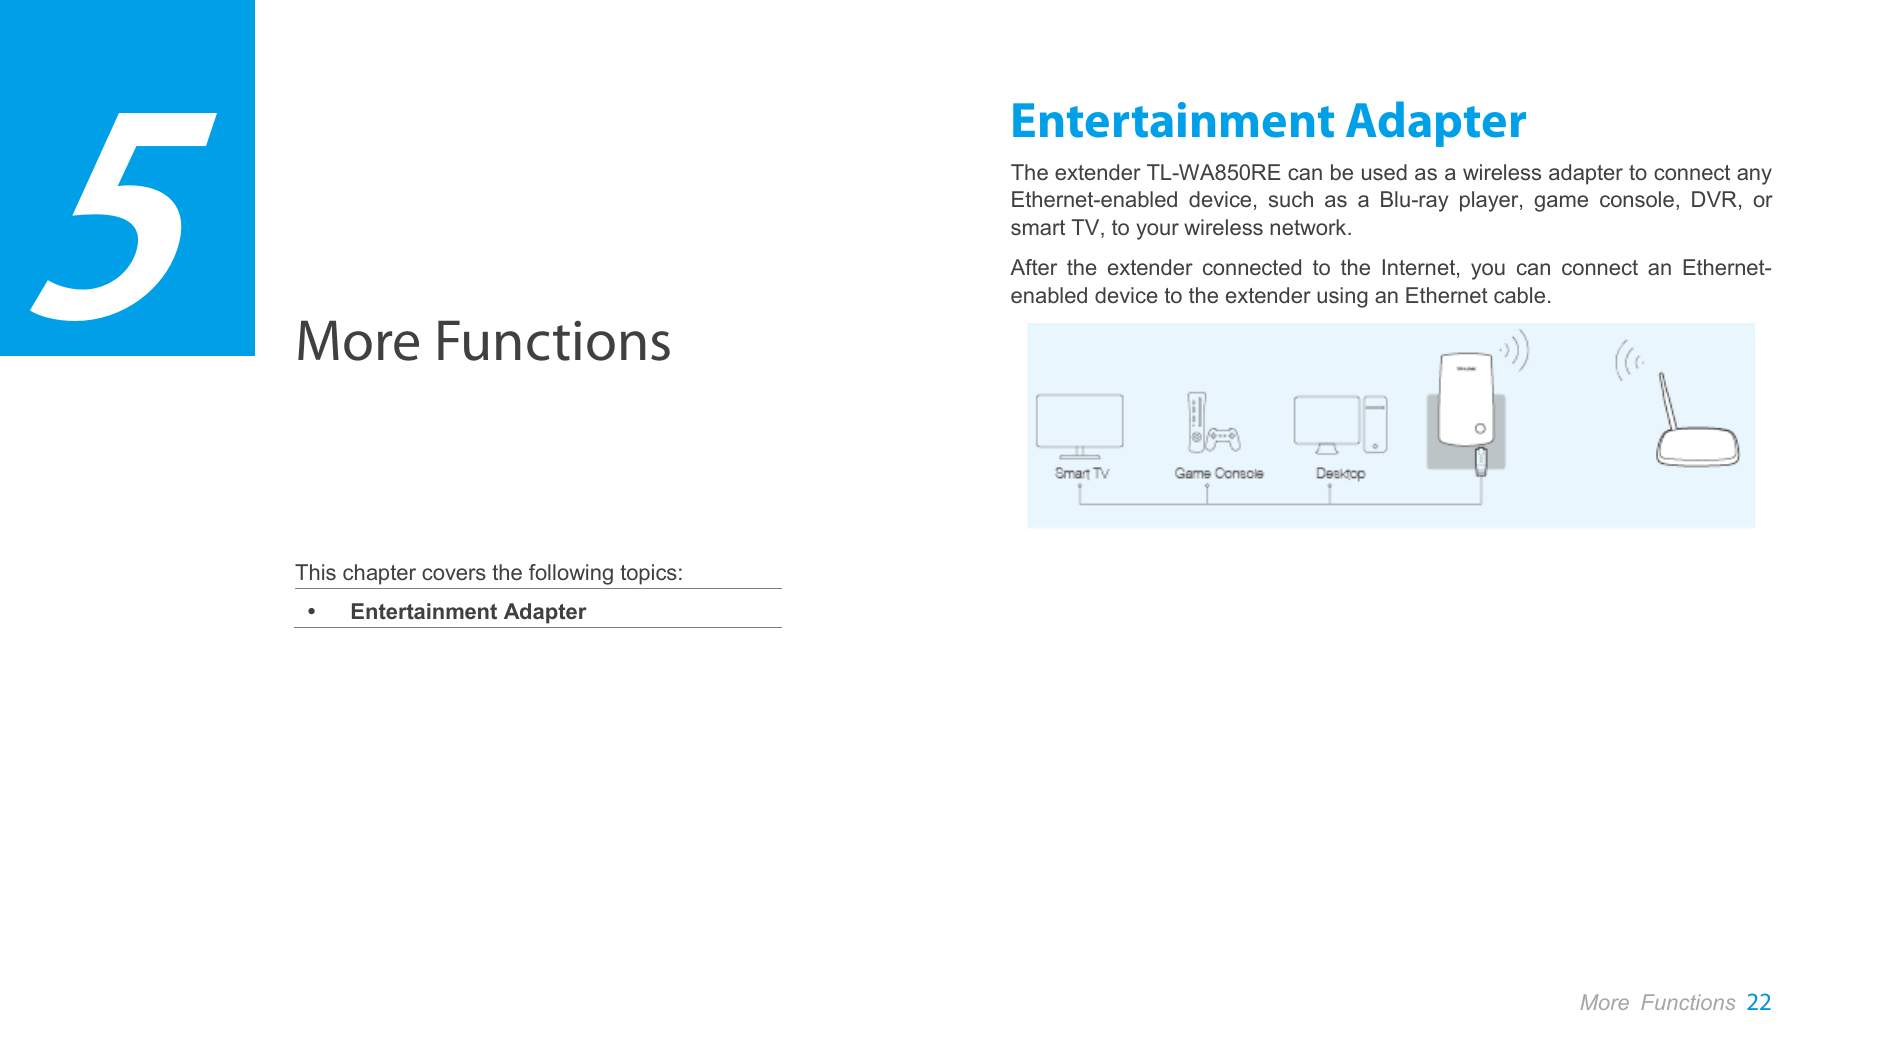                  More Functions     This chapter covers the following topics:  Entertainment Adapter Entertainment Adapter The extender TL-WA850RE can be used as a wireless adapter to connect any Ethernet-enabled device, such as a Blu-ray player, game console, DVR, or smart TV, to your wireless network. After the  extender  connected to the Internet,  you can connect an Ethernet-enabled device to the extender using an Ethernet cable. 5 More Functions 22  